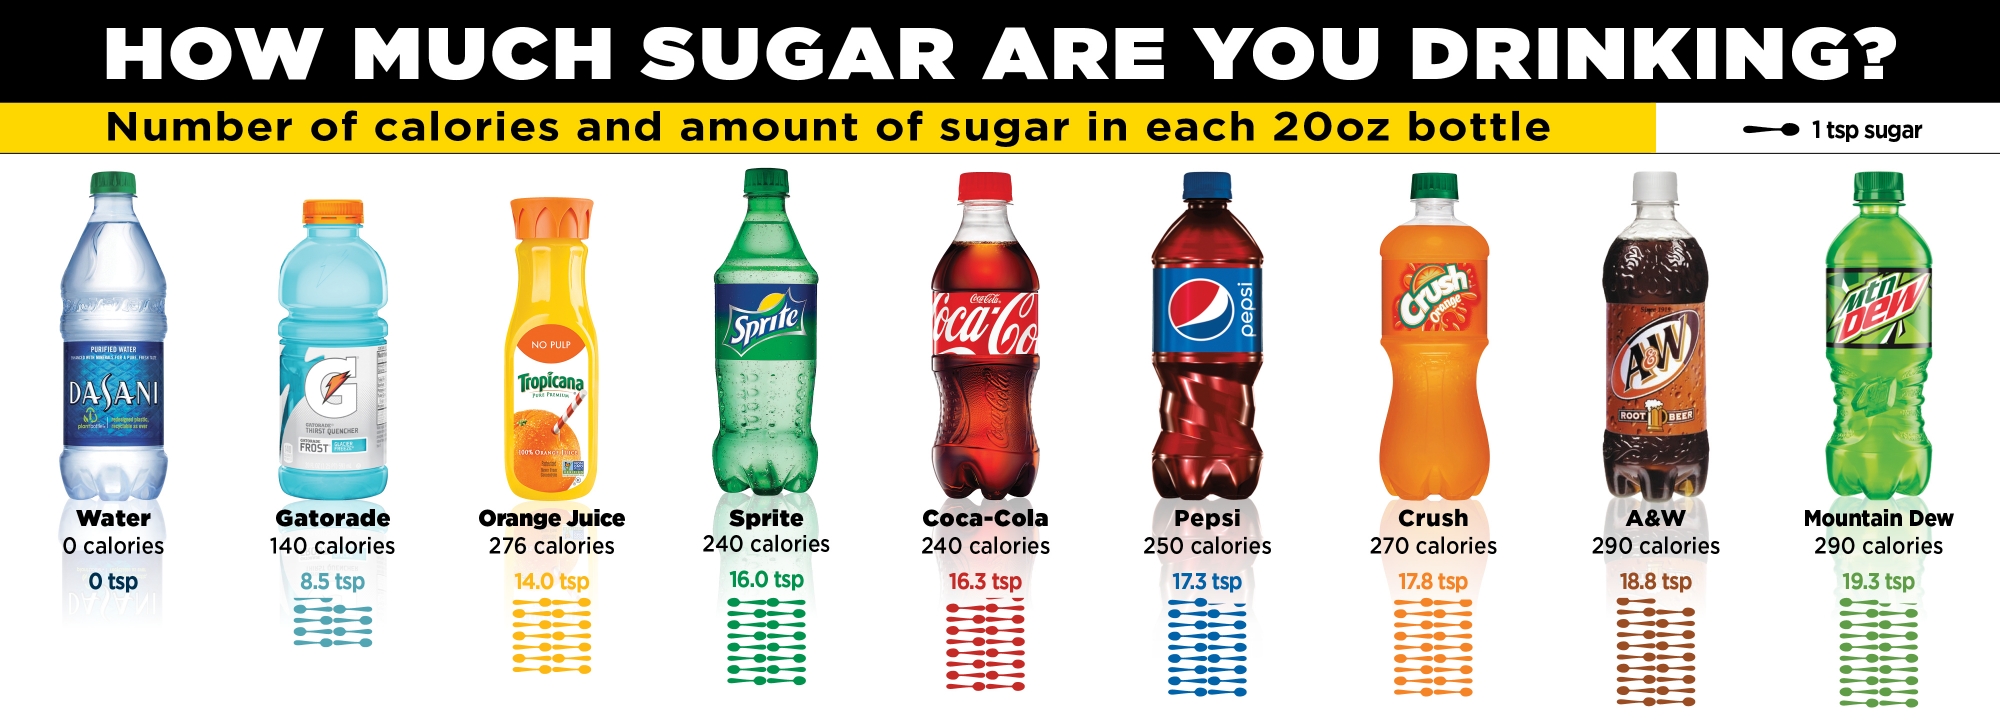 How much sugar are you drinking? | Signage